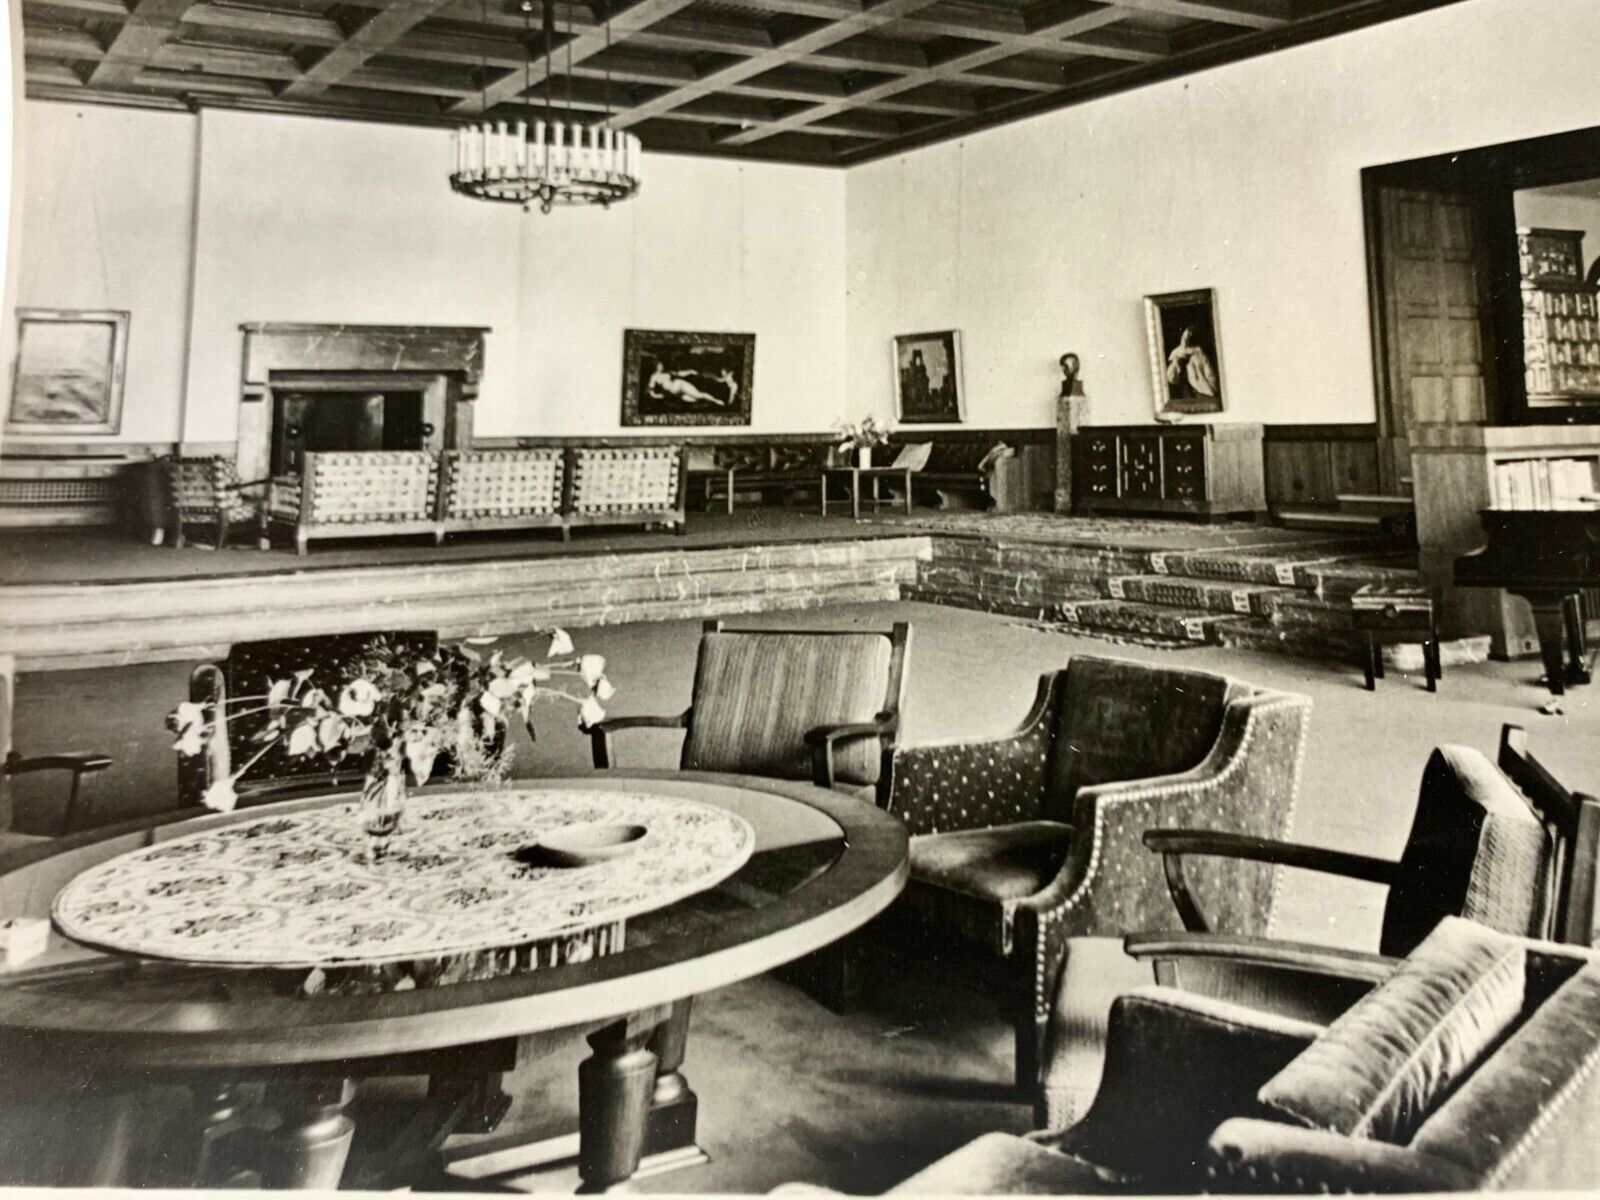 F4 Found Photograph Leader Of Germany Interior View Main Hall Home Berchtesgaden